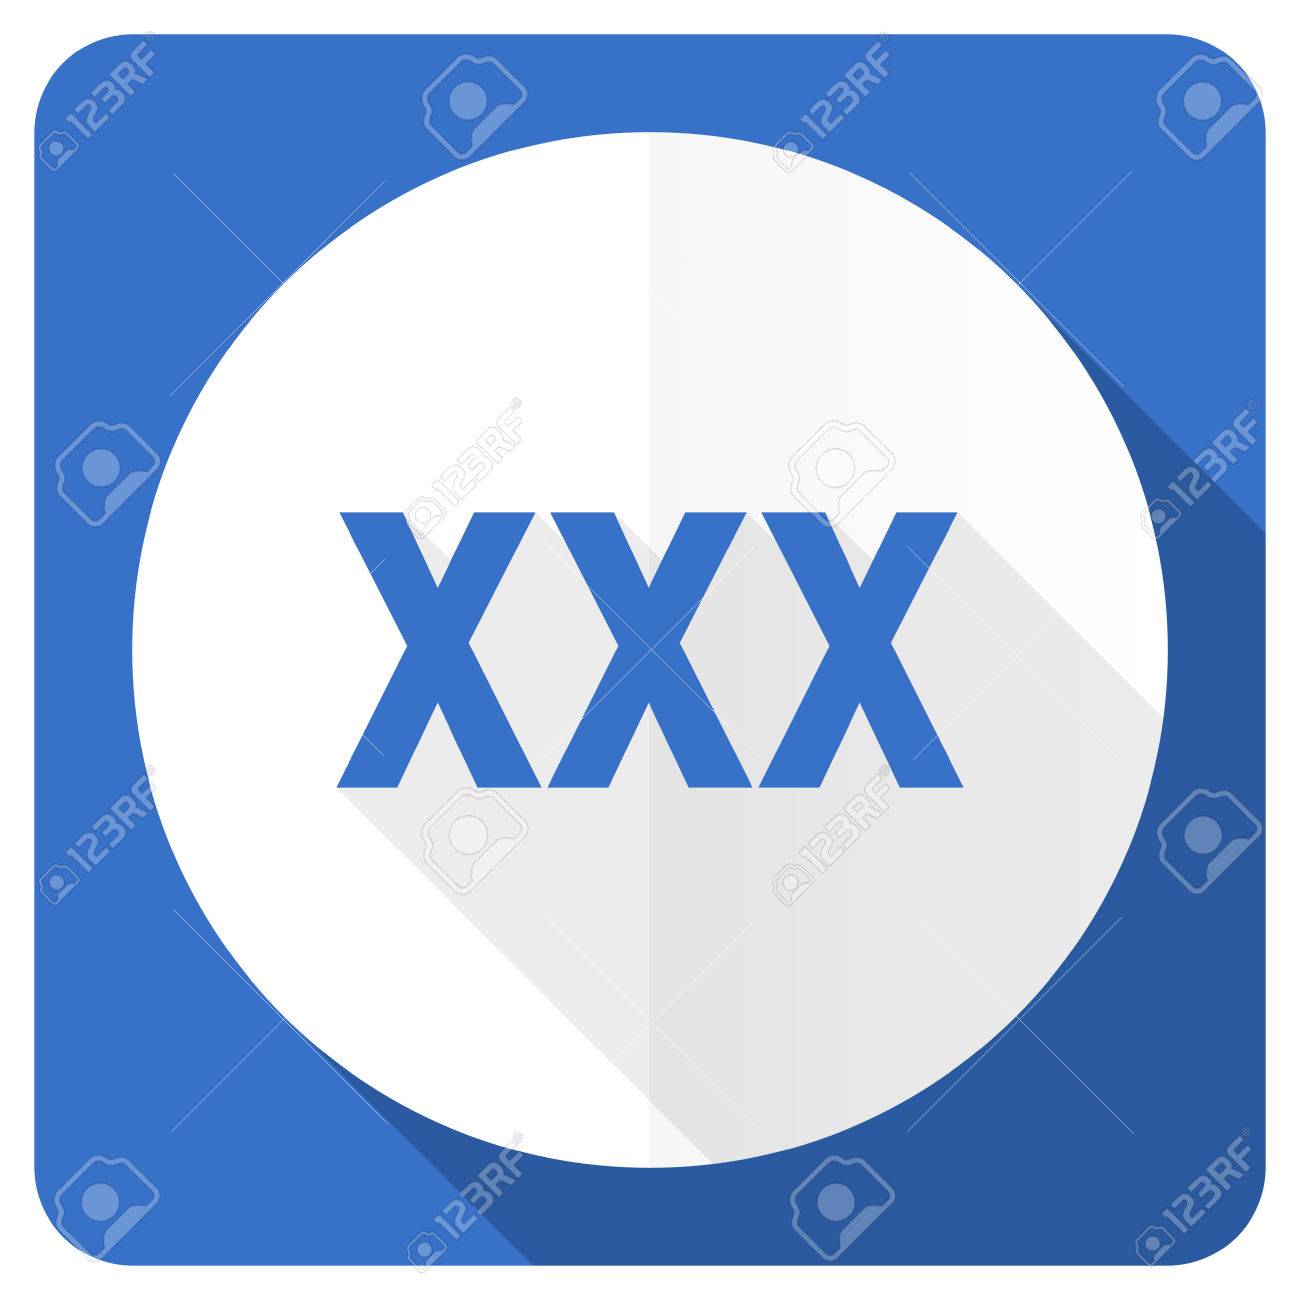 xxx blue flat icon porn sign stock photo picture and royalty free